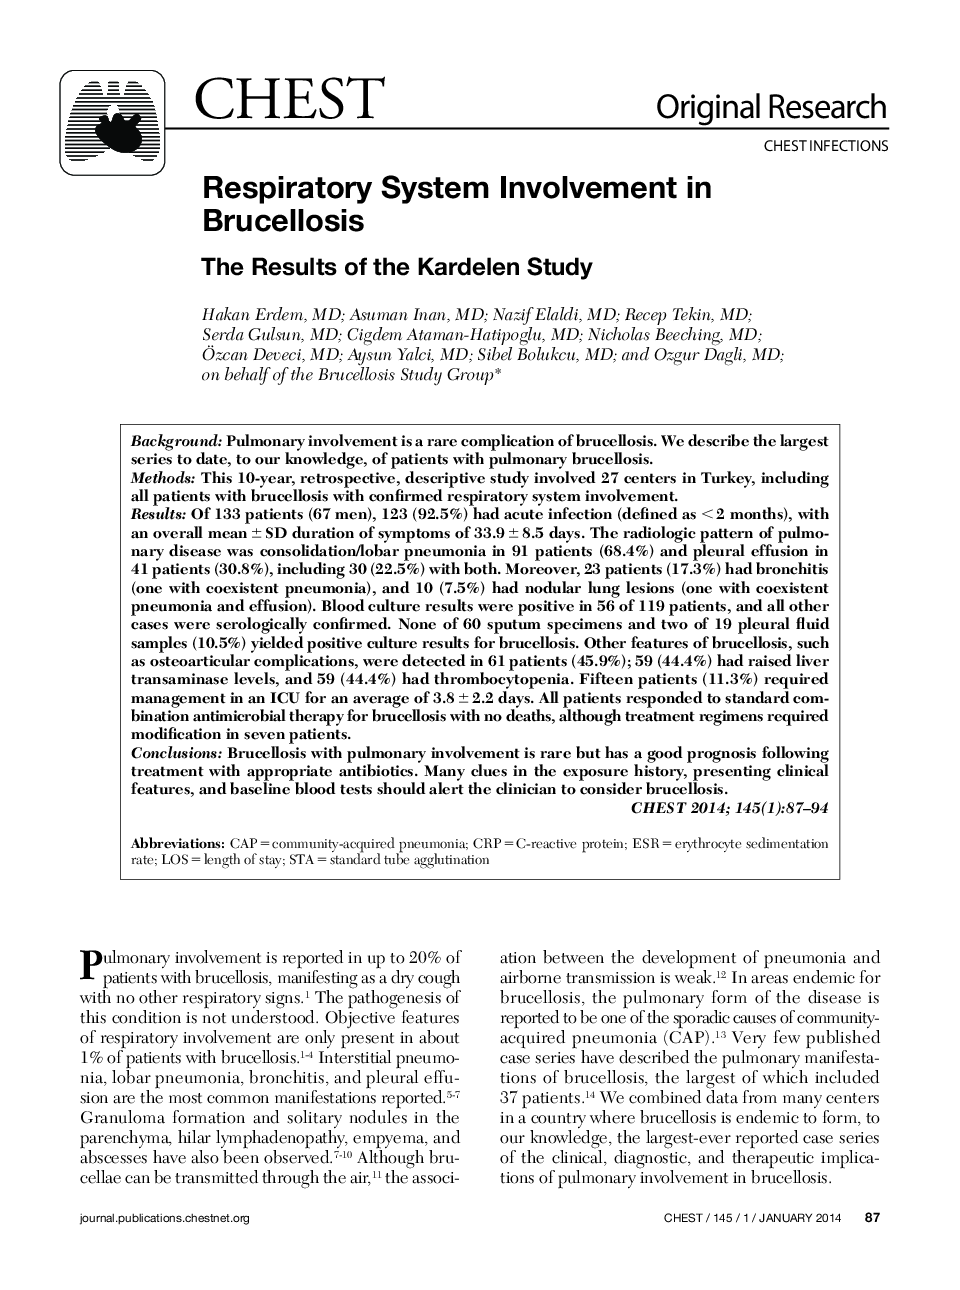 Respiratory System Involvement in Brucellosis : The Results of the Kardelen Study